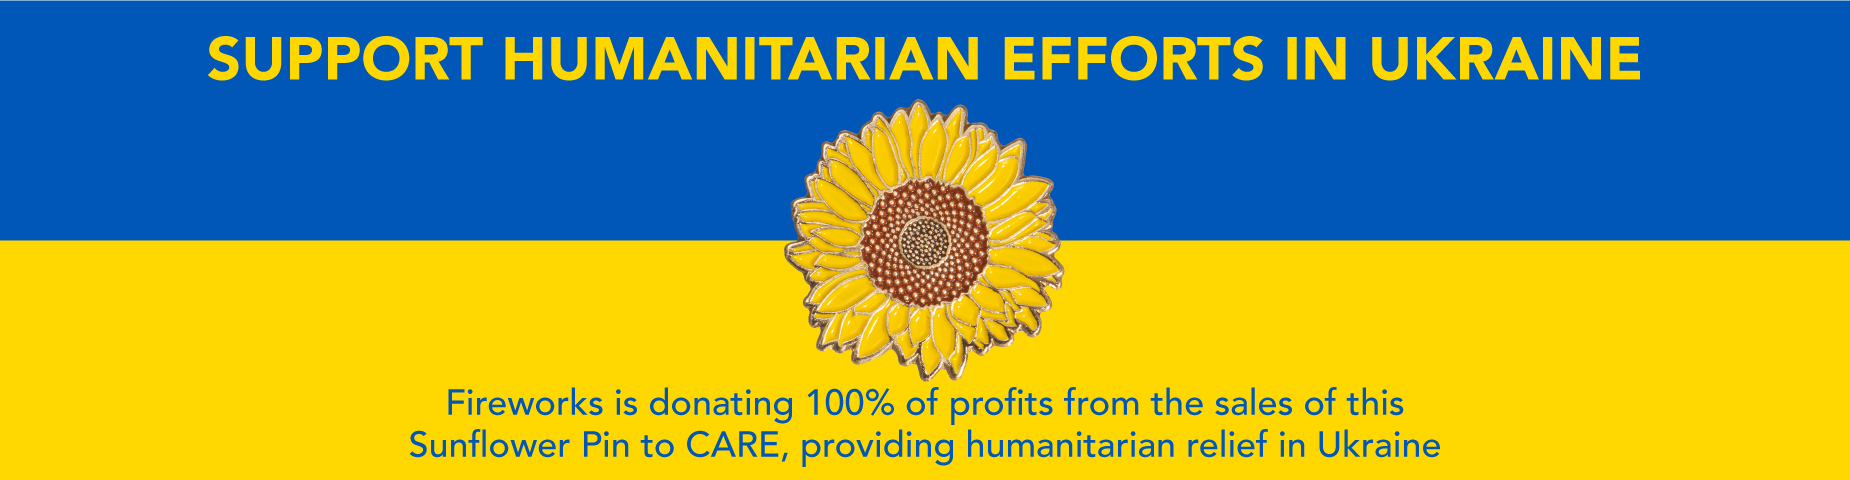 SUPPORT HUMANITARIAN EFFORTS IN UKRAINE: Fireworks is donating 100% of profits from the sales of this Sunflower Pin to CARE, providing humanitarian relief in Ukraine